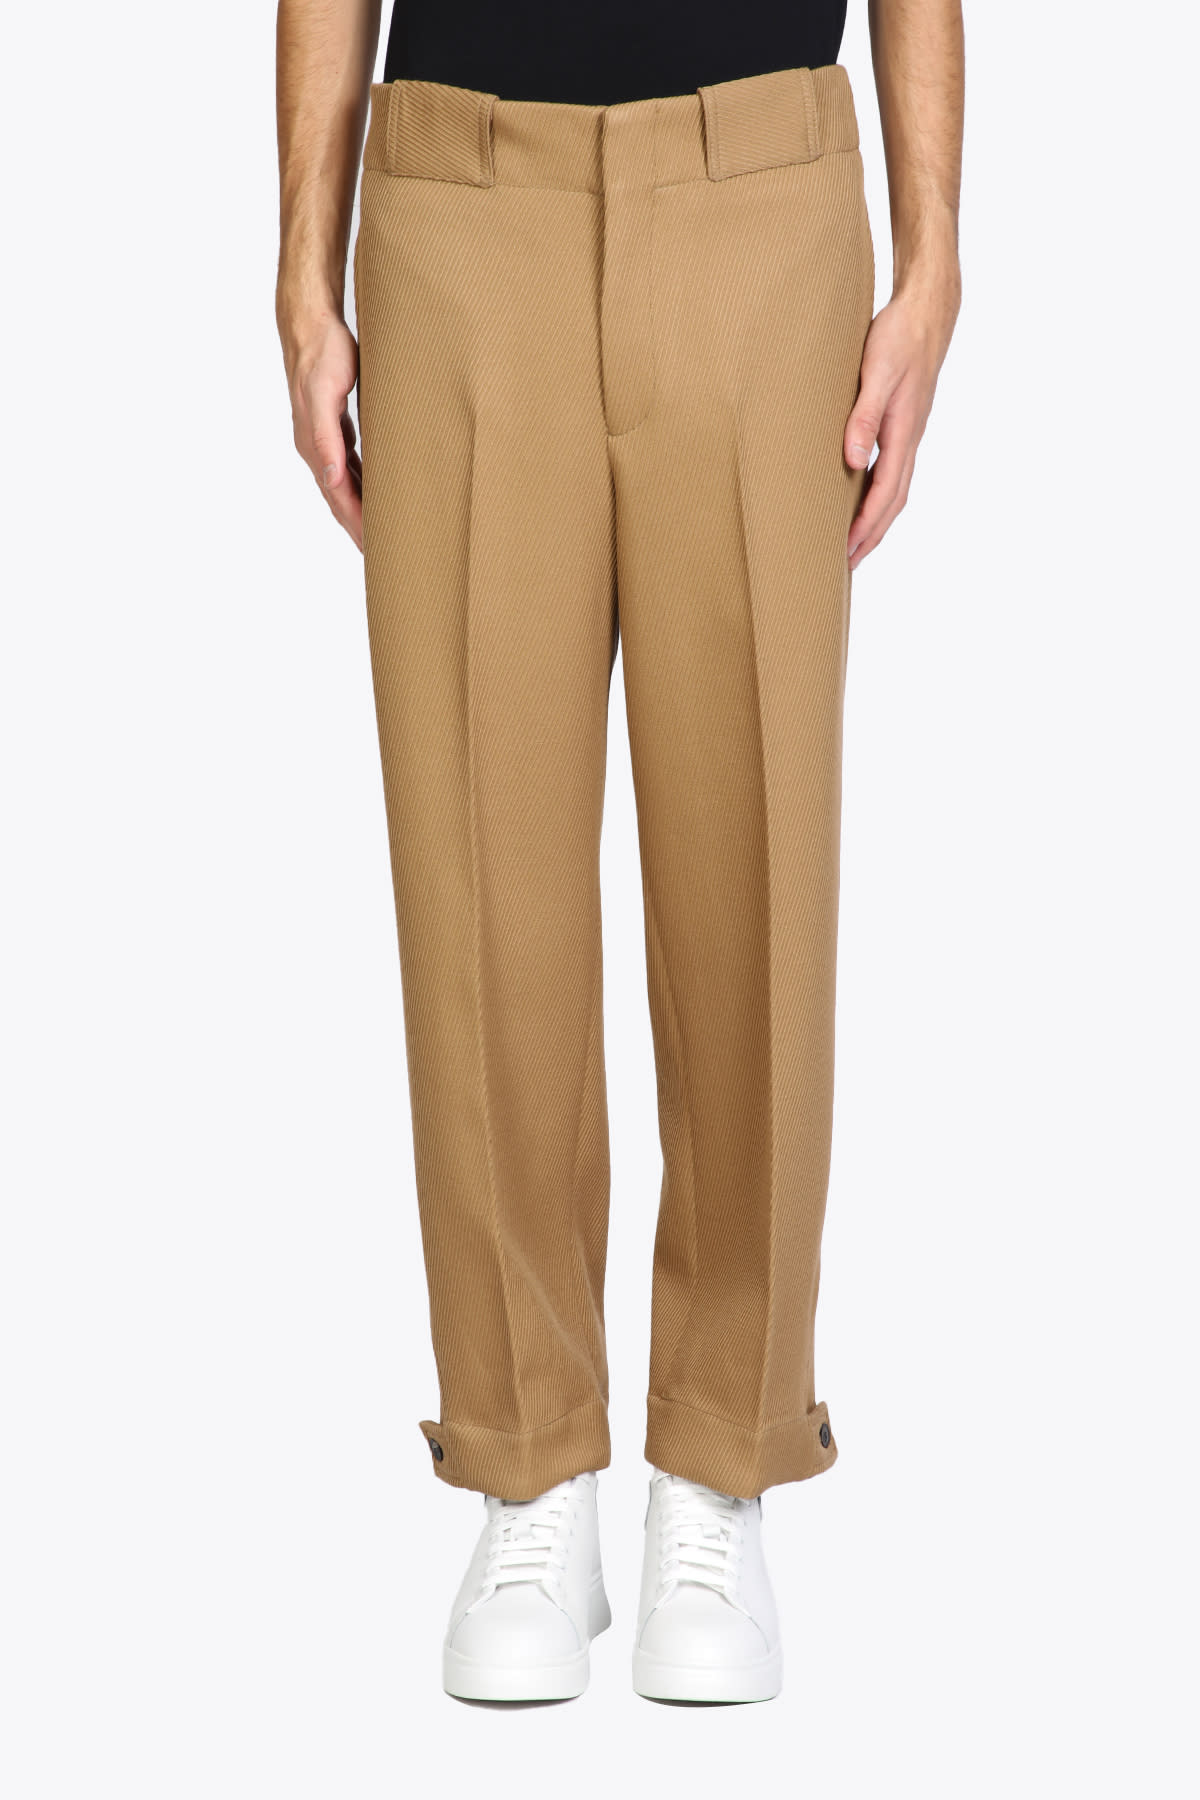 Emporio Armani Trouser Camel wool pant with wide leg.